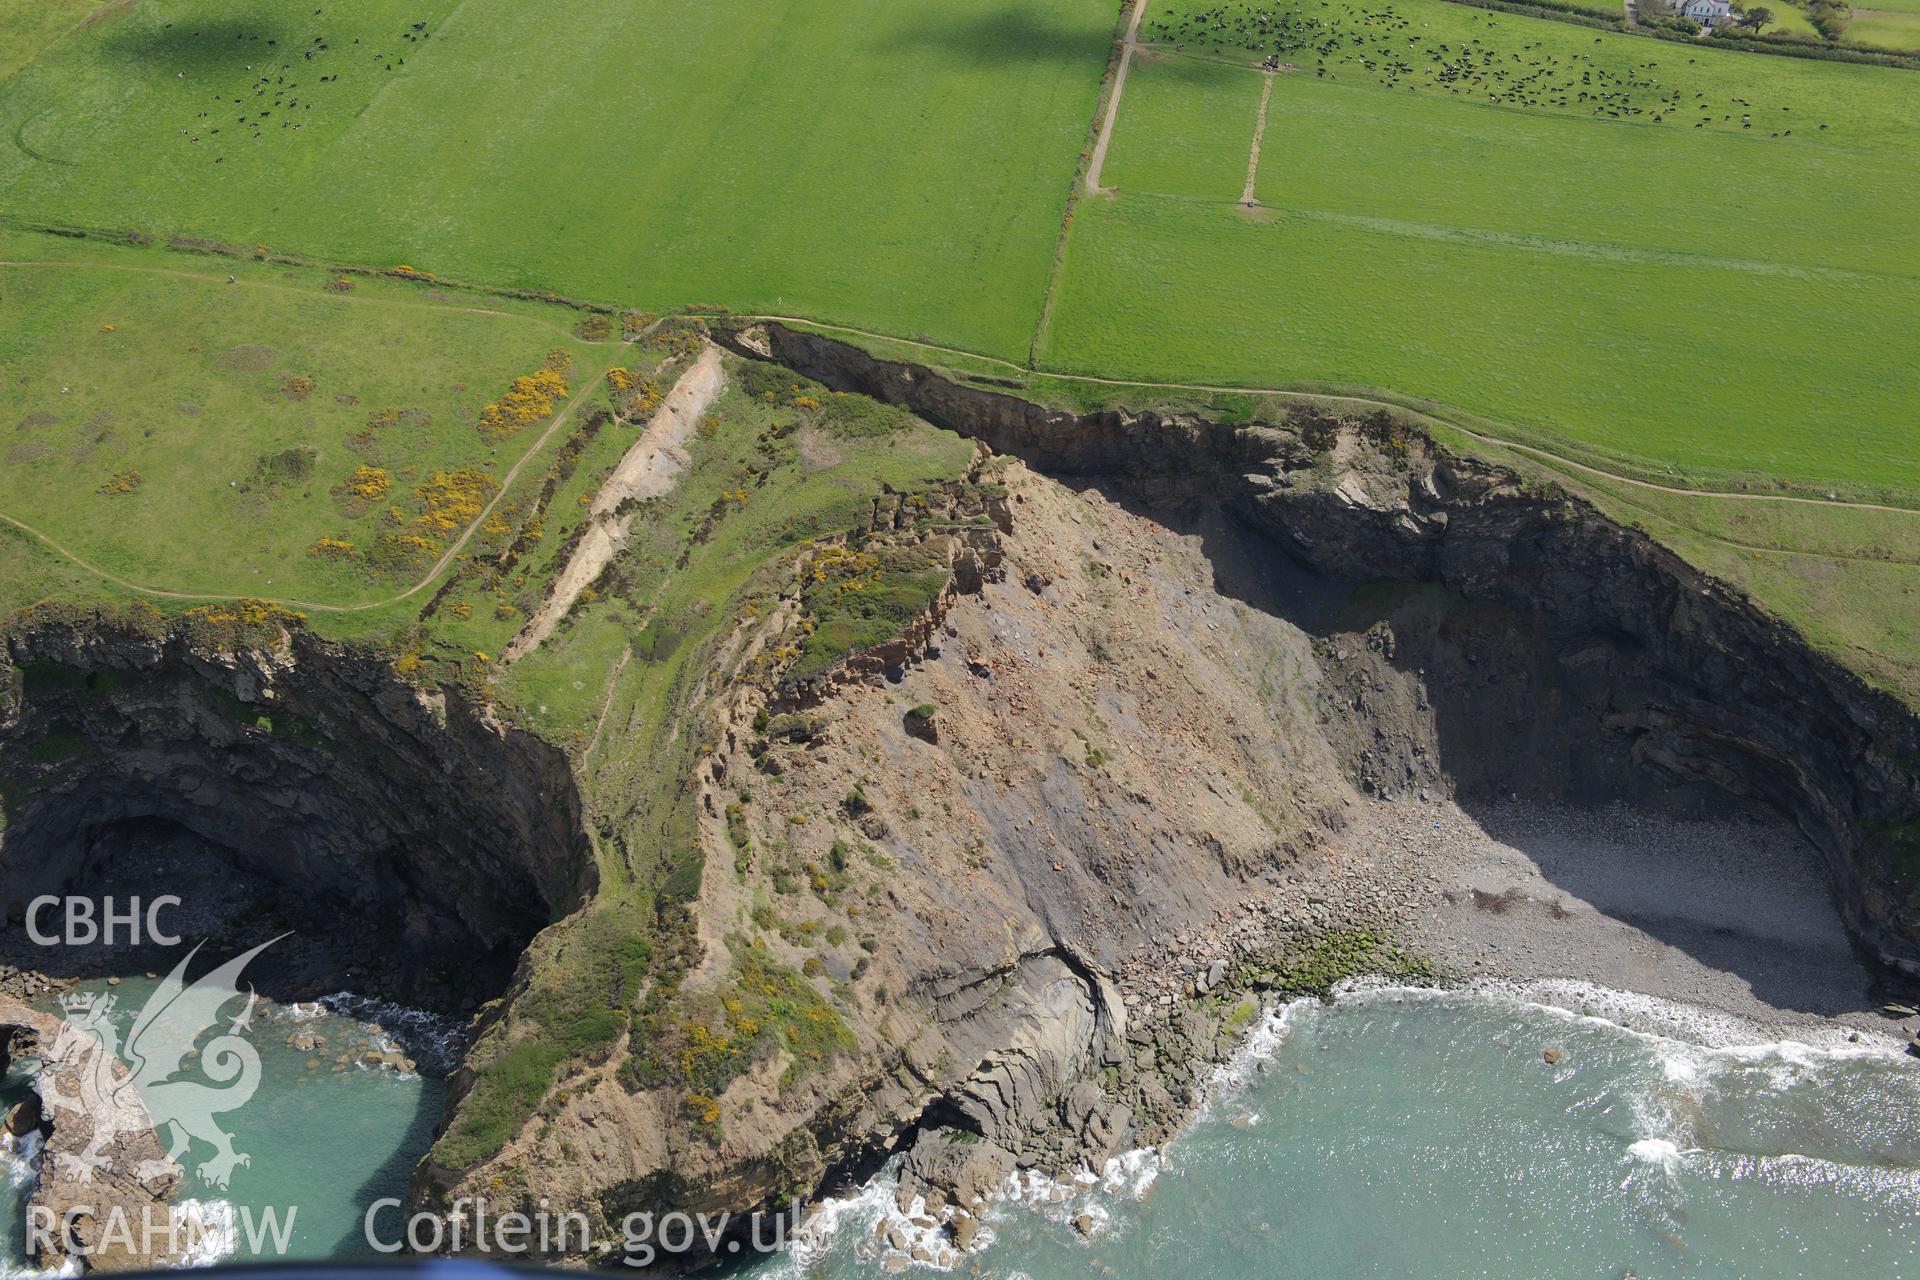 Black Point Rath promontory fort, near Haverford West. Oblique aerial photograph taken during the Royal Commission's programme of archaeological aerial reconnaissance by Toby Driver on 13th May 2015.